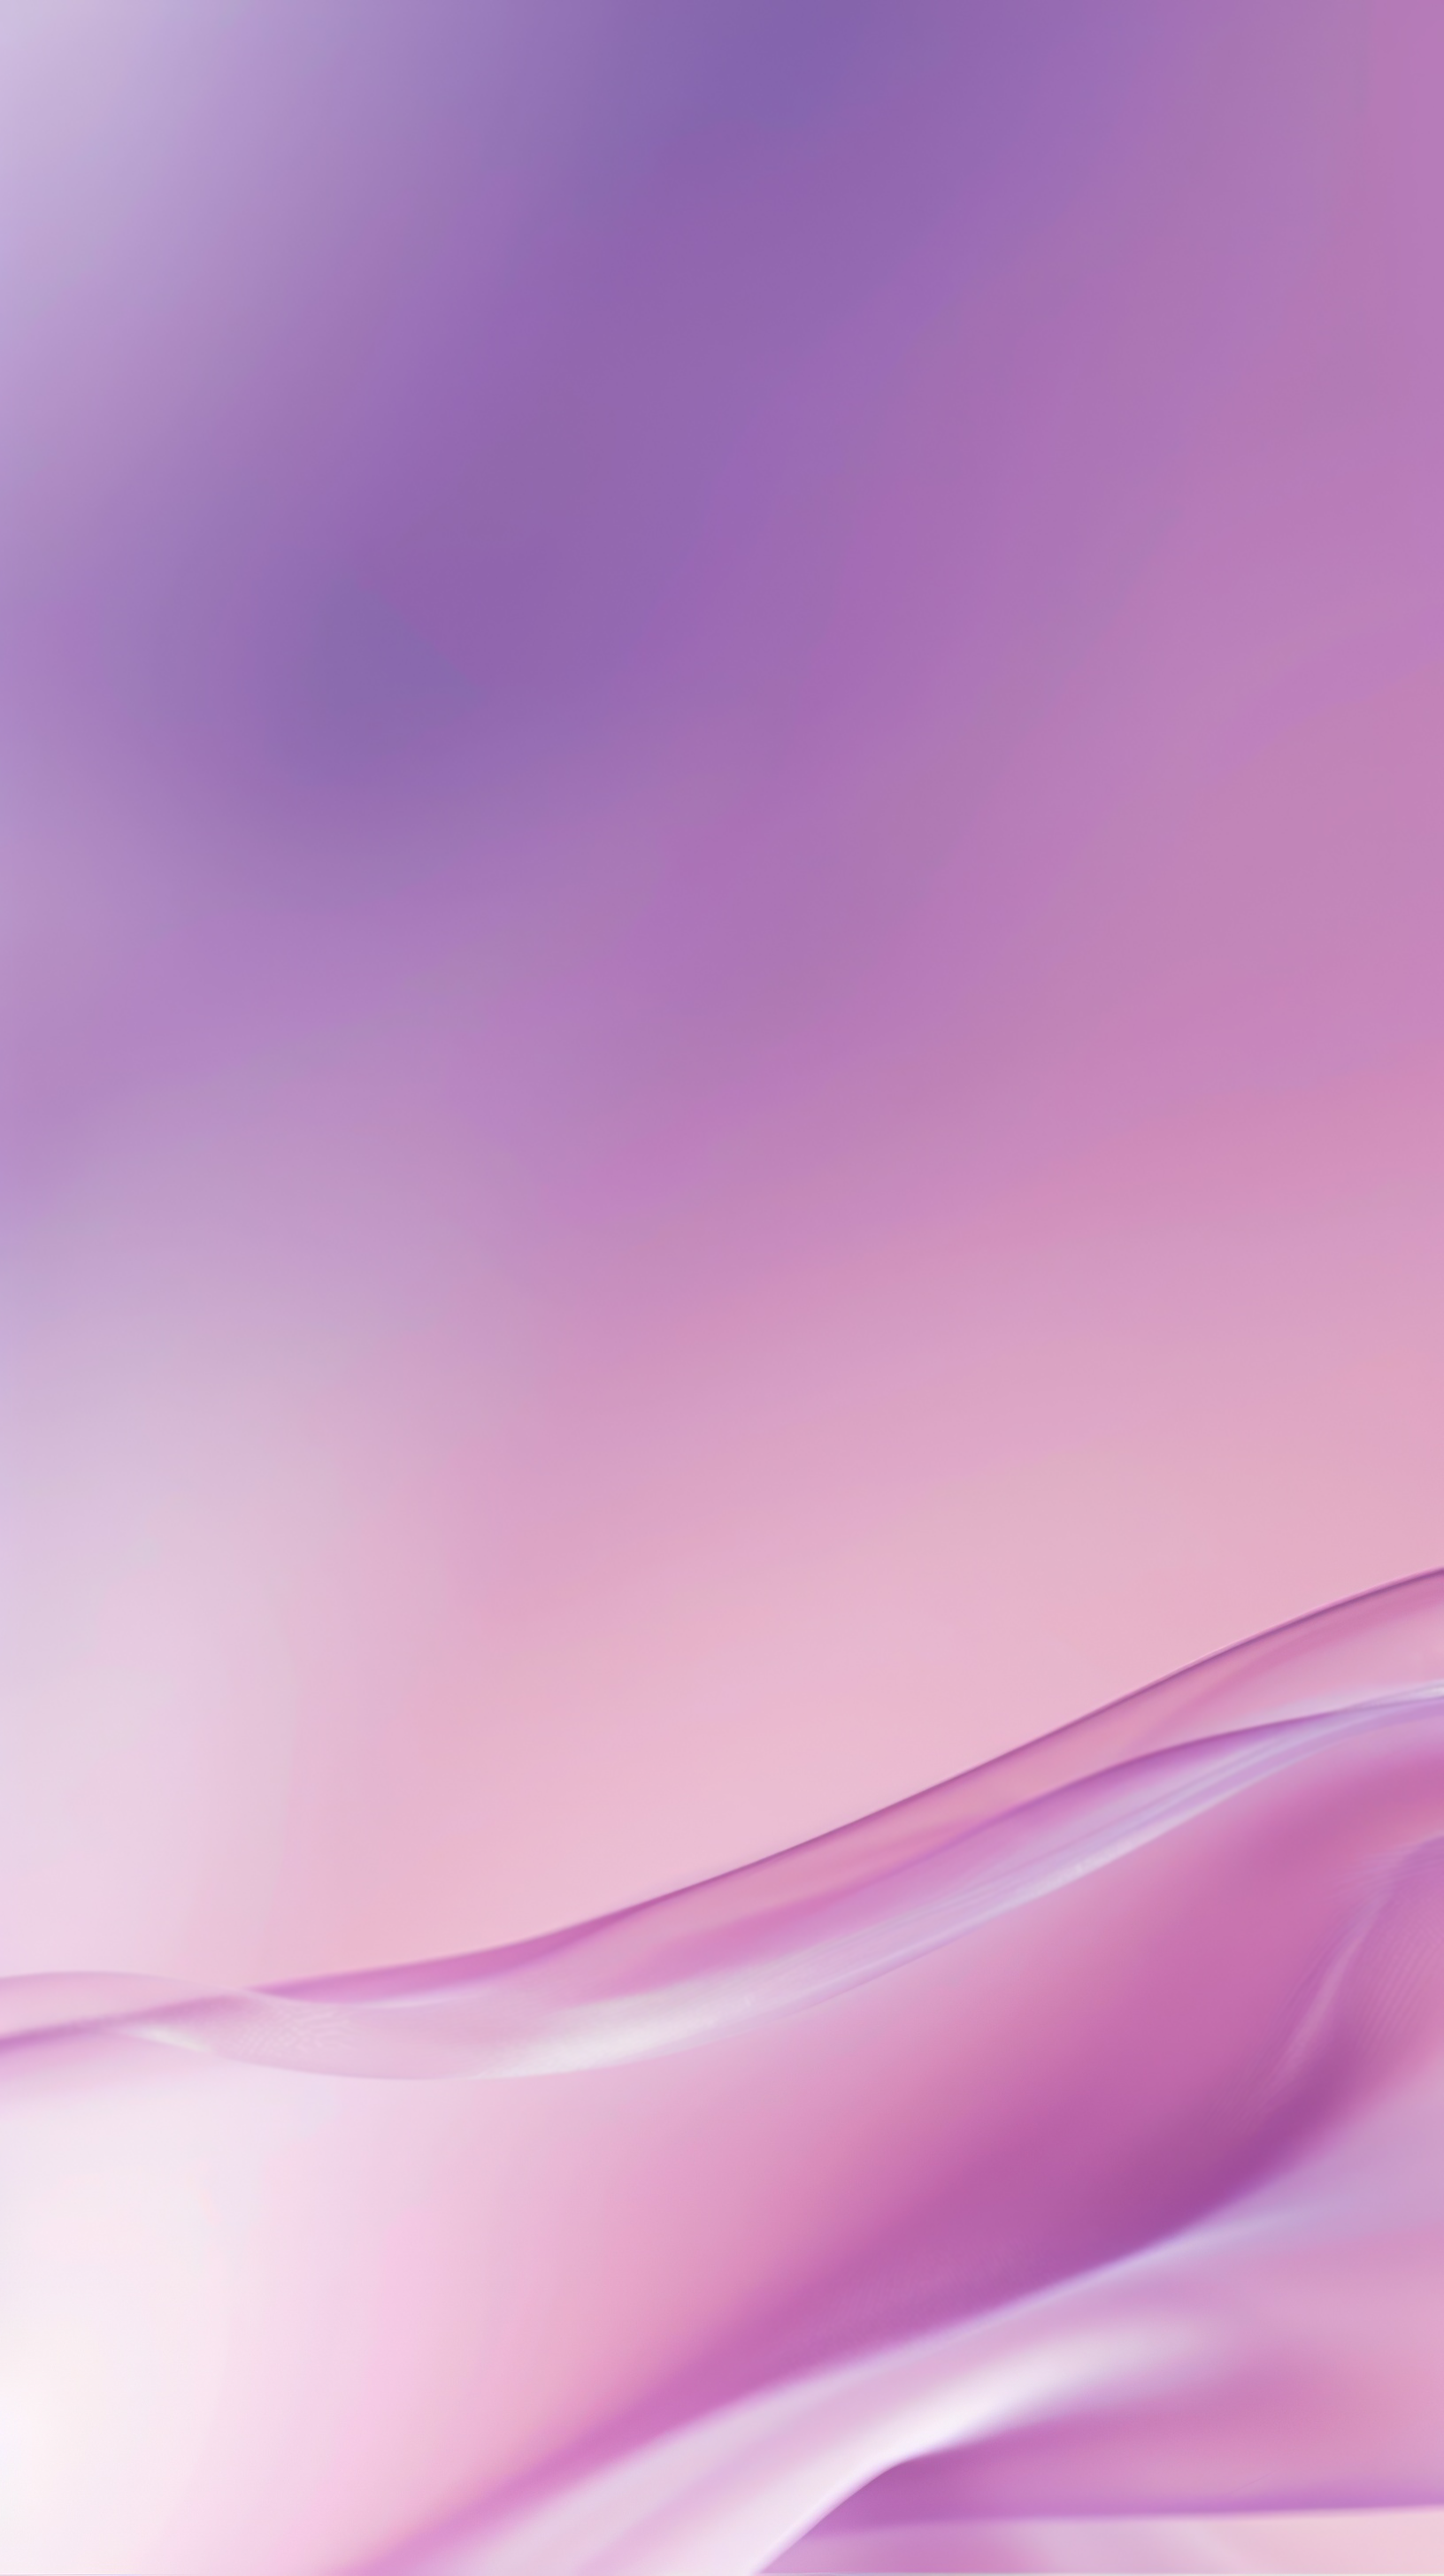 Abstract pink purple peach gradient background with falling waves